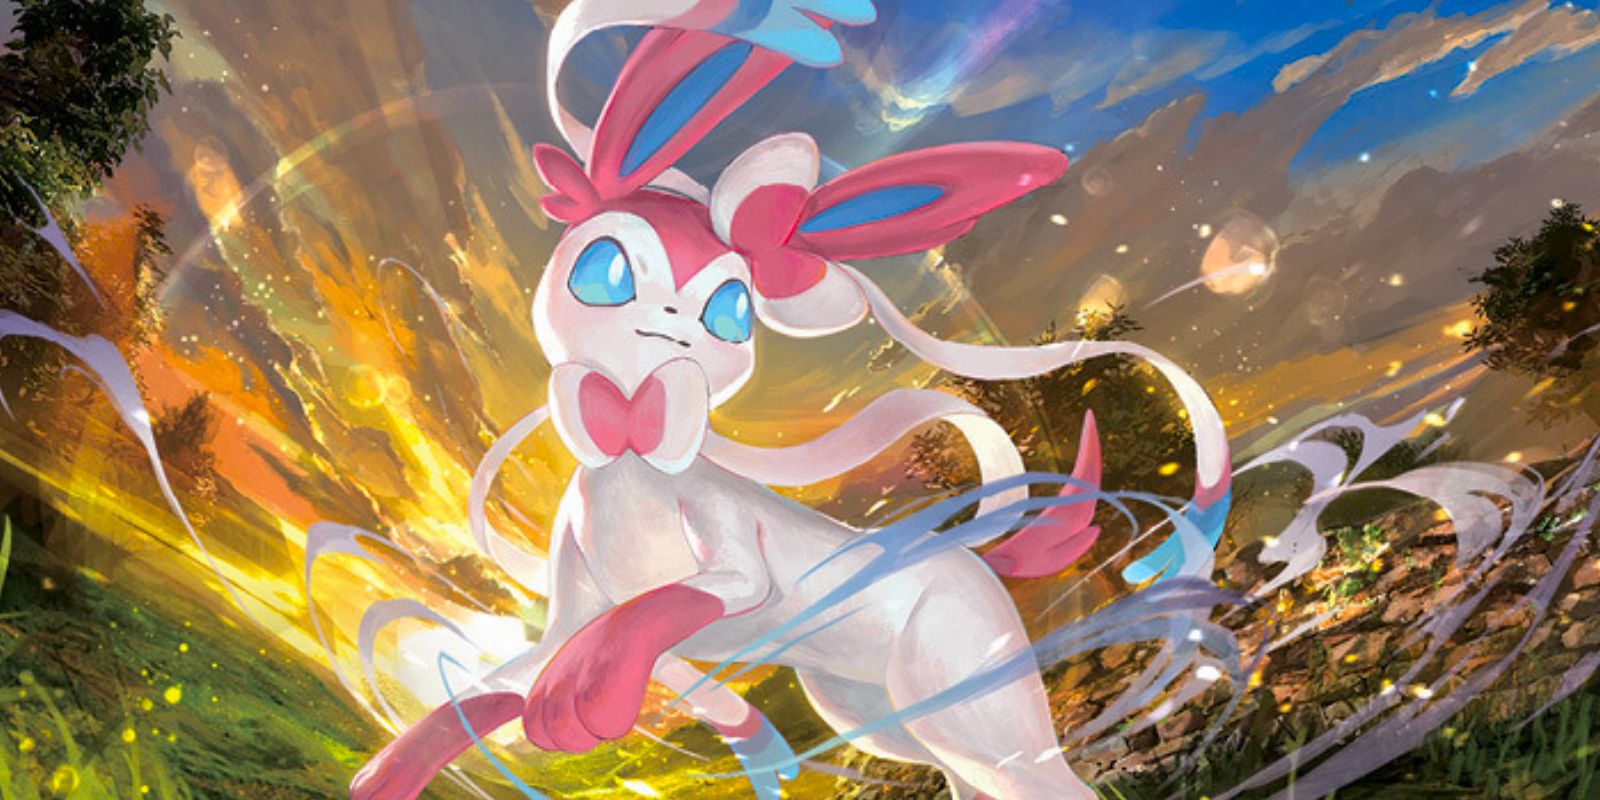 What Pokémon Cards In The Evolving Skies Expansion Are Worth The Most